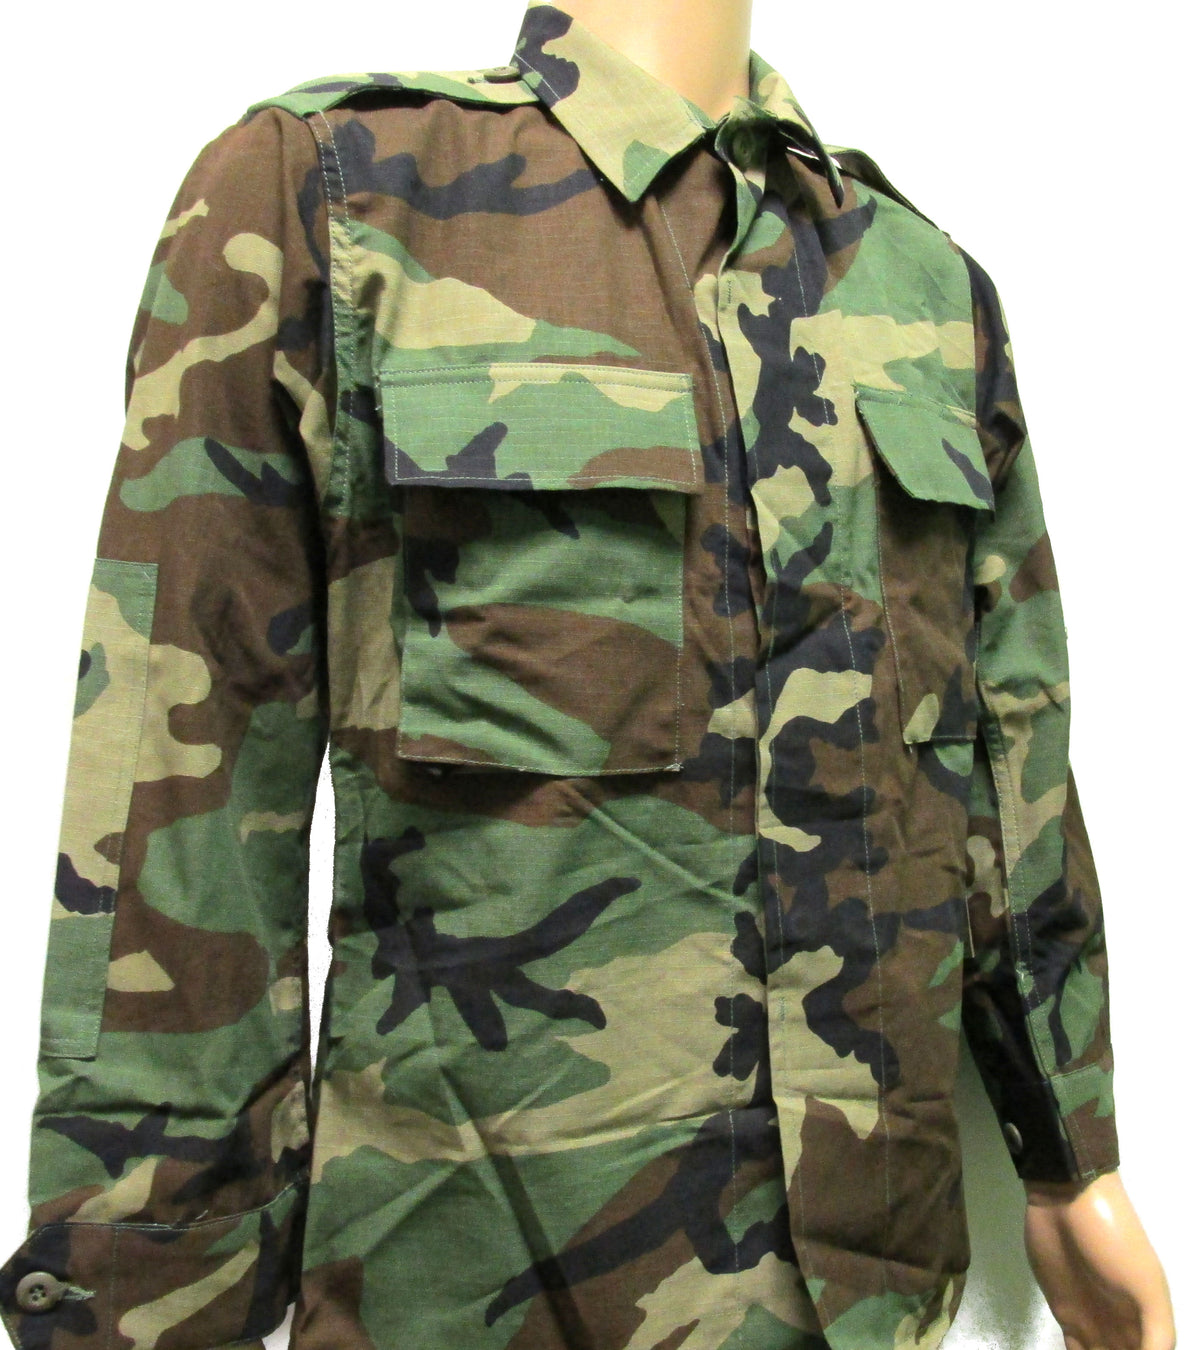 CLEARANCE - Propper Ripstop 2-Pocket BDU Shirt with Epaulets